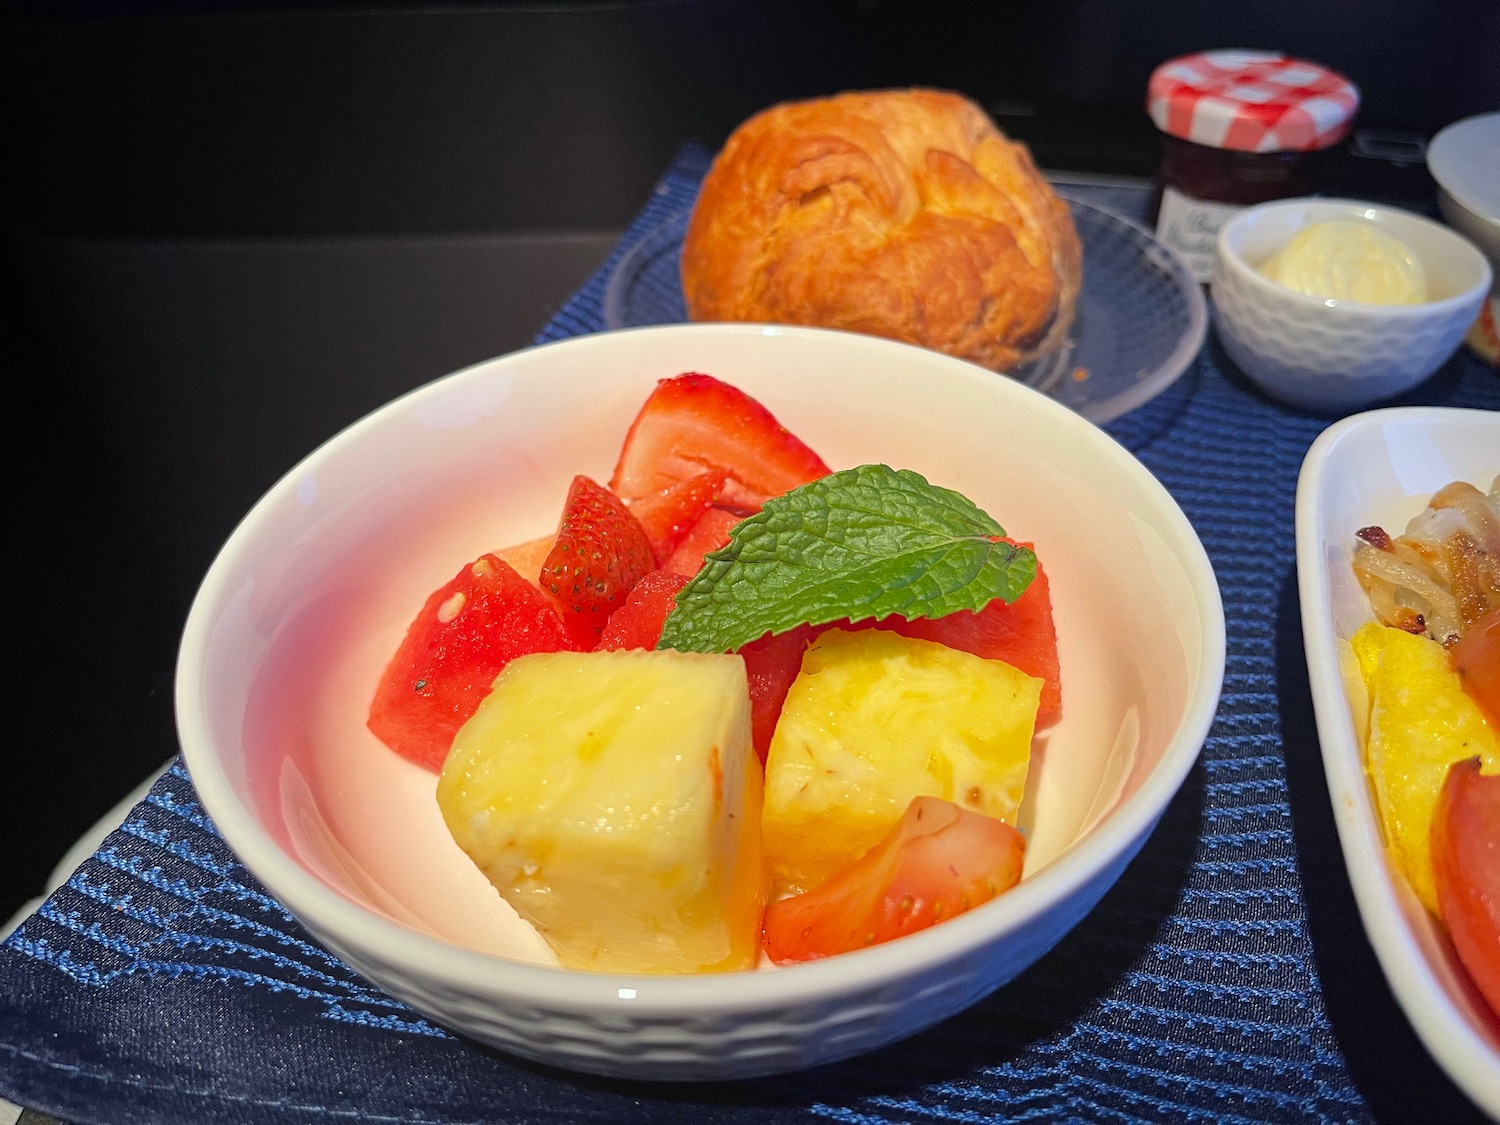 a bowl of fruit and a pastry